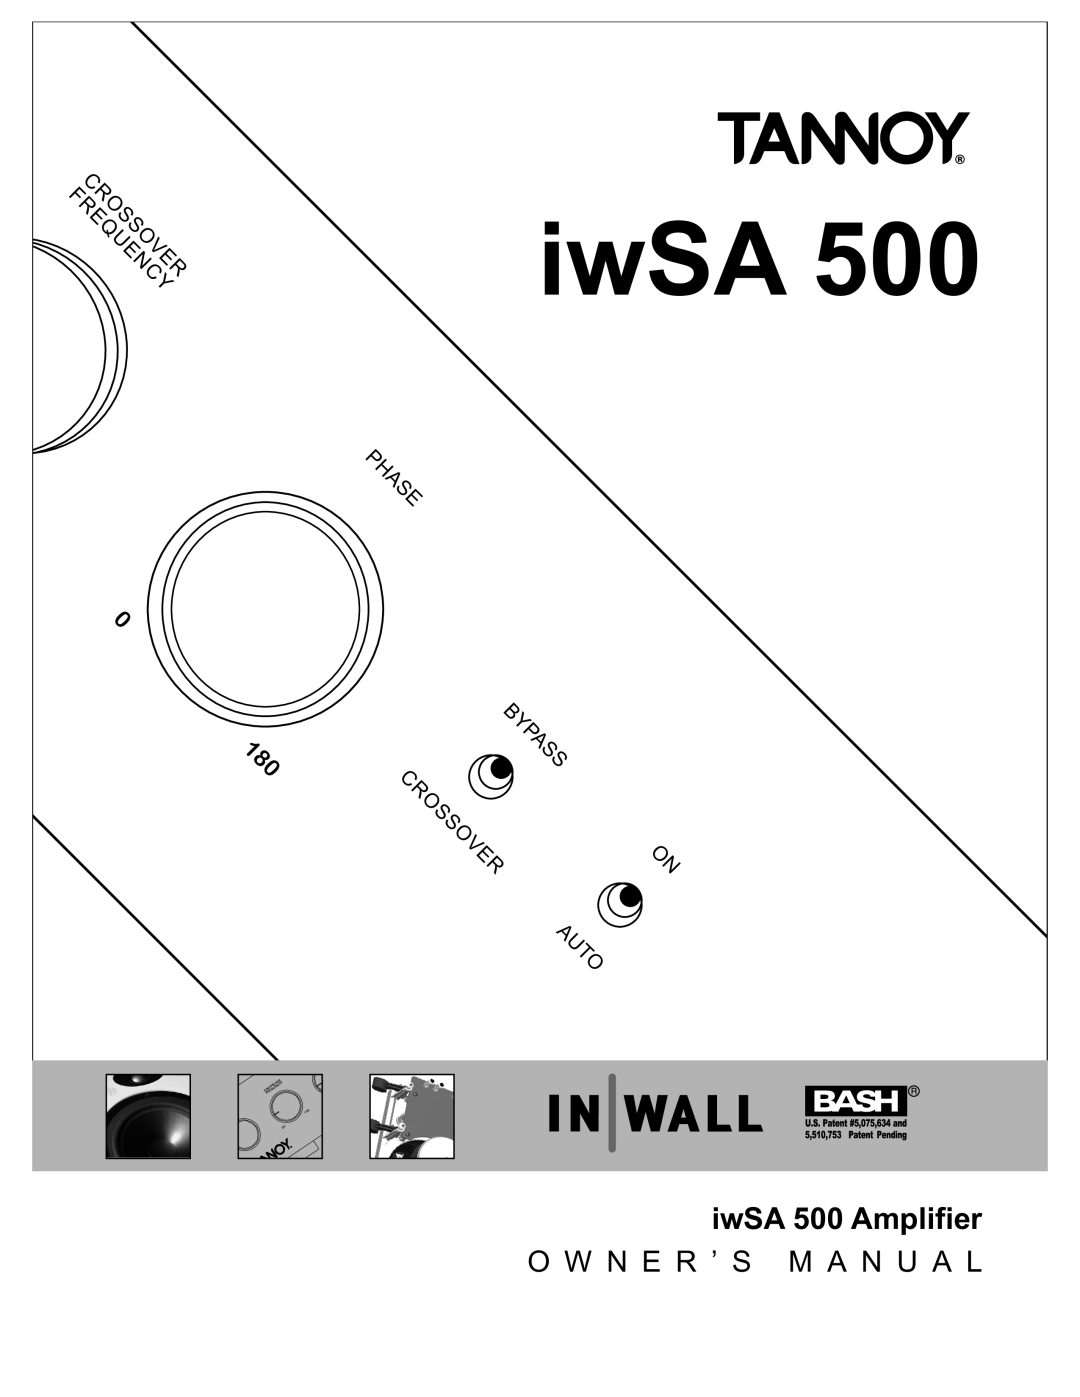 Tannoy owner manual iwSA 500 Amplifier, Frequencycrossover, Phase, Bypass, Crossover, Auto, O W N E R ’ S M A N U A L 